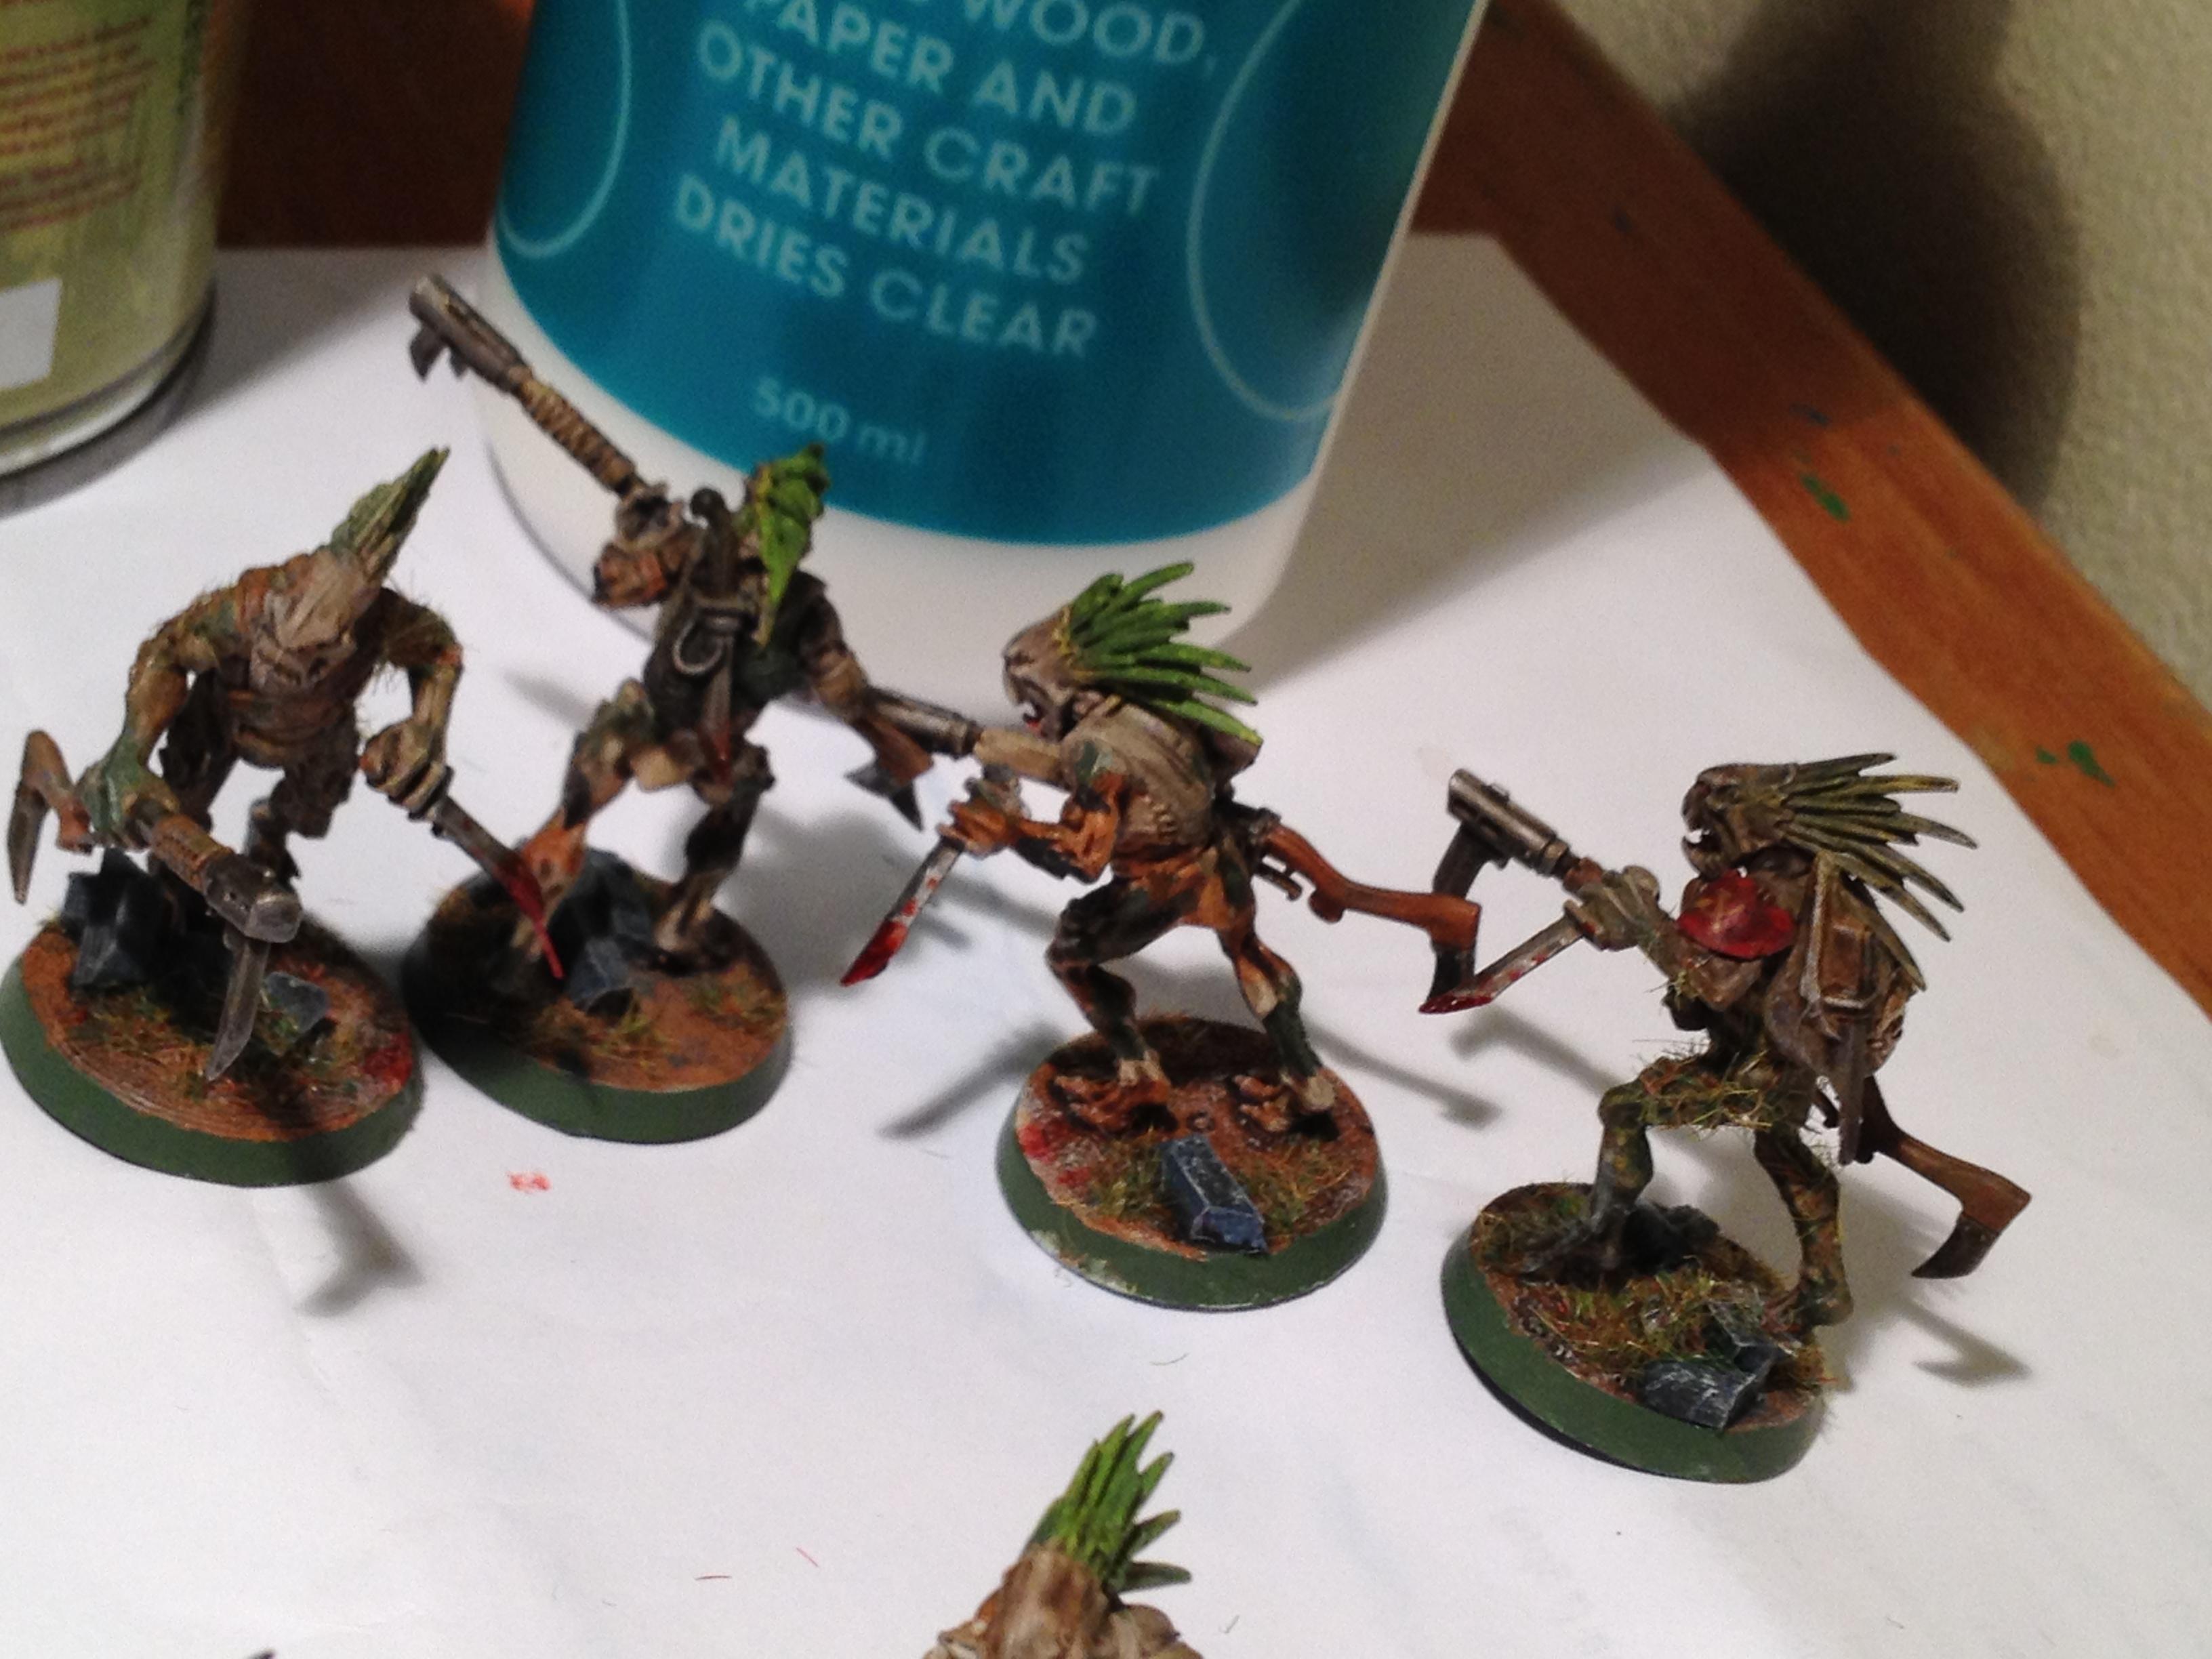 Here is a set of Kroot, bloodied weapons